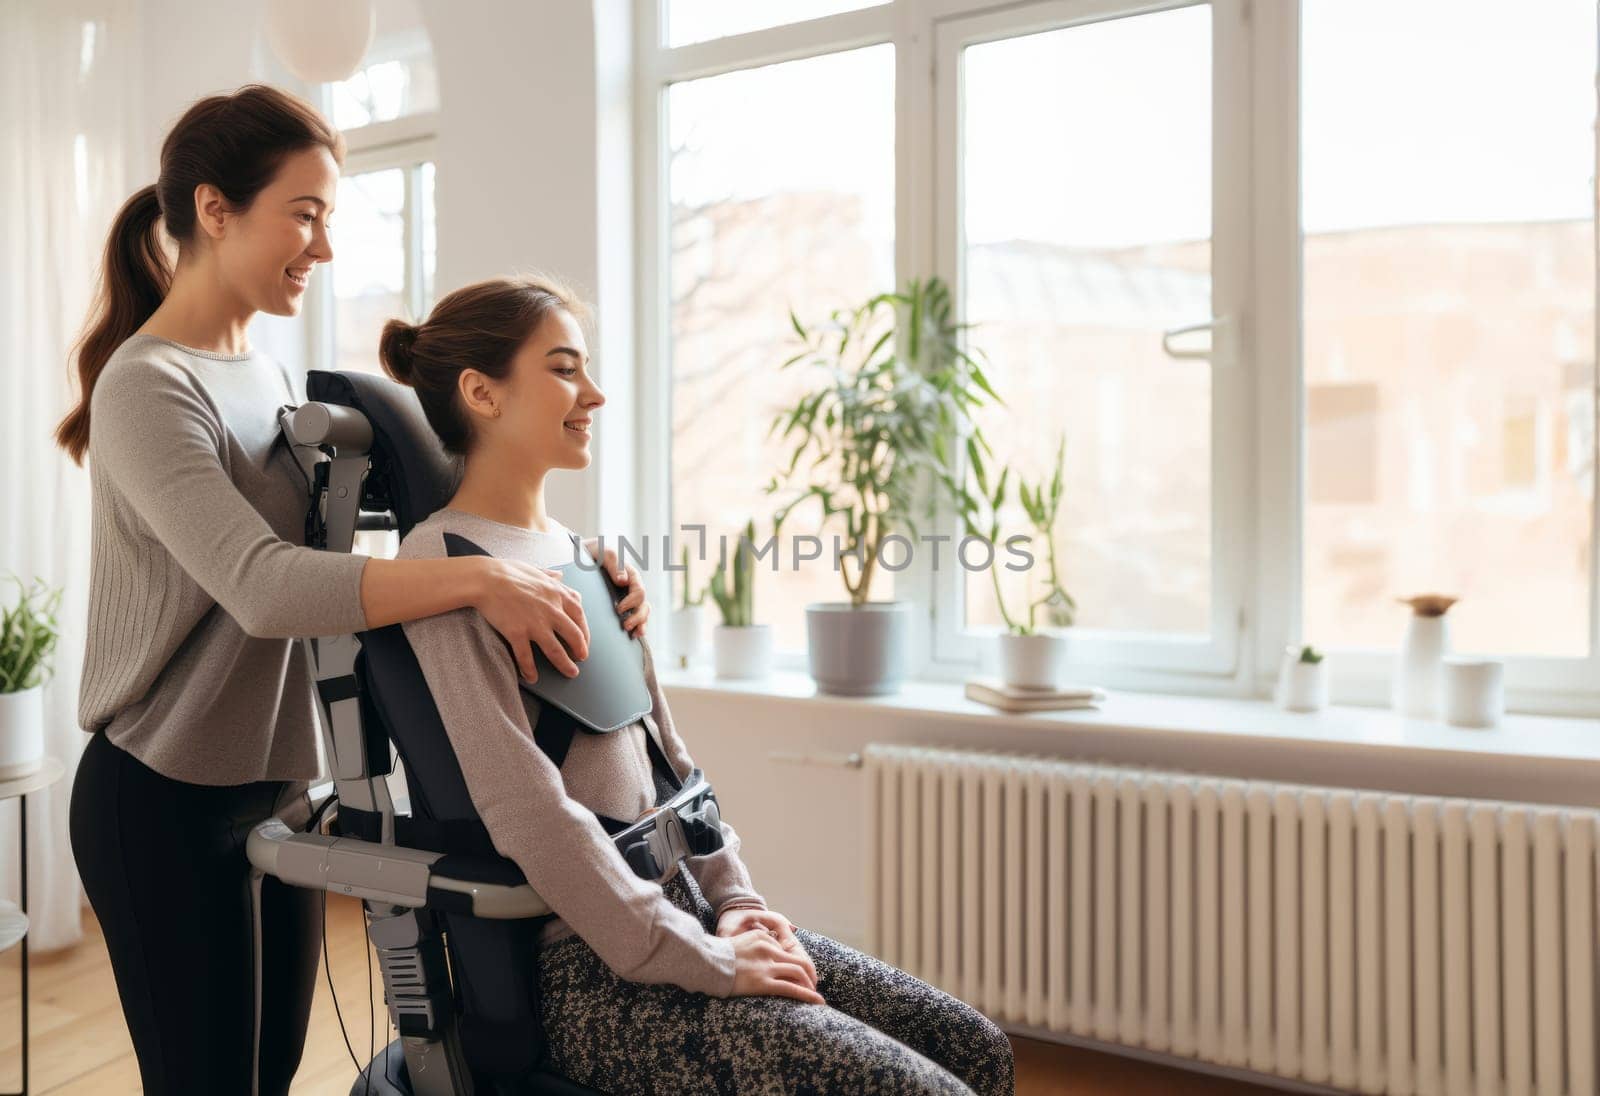 In a heartfelt scene, a doctor provides compassionate care during a home visit to a patient in a wheelchair, who is recovering from a broken neck, offering comfort and support in their journey towards healing